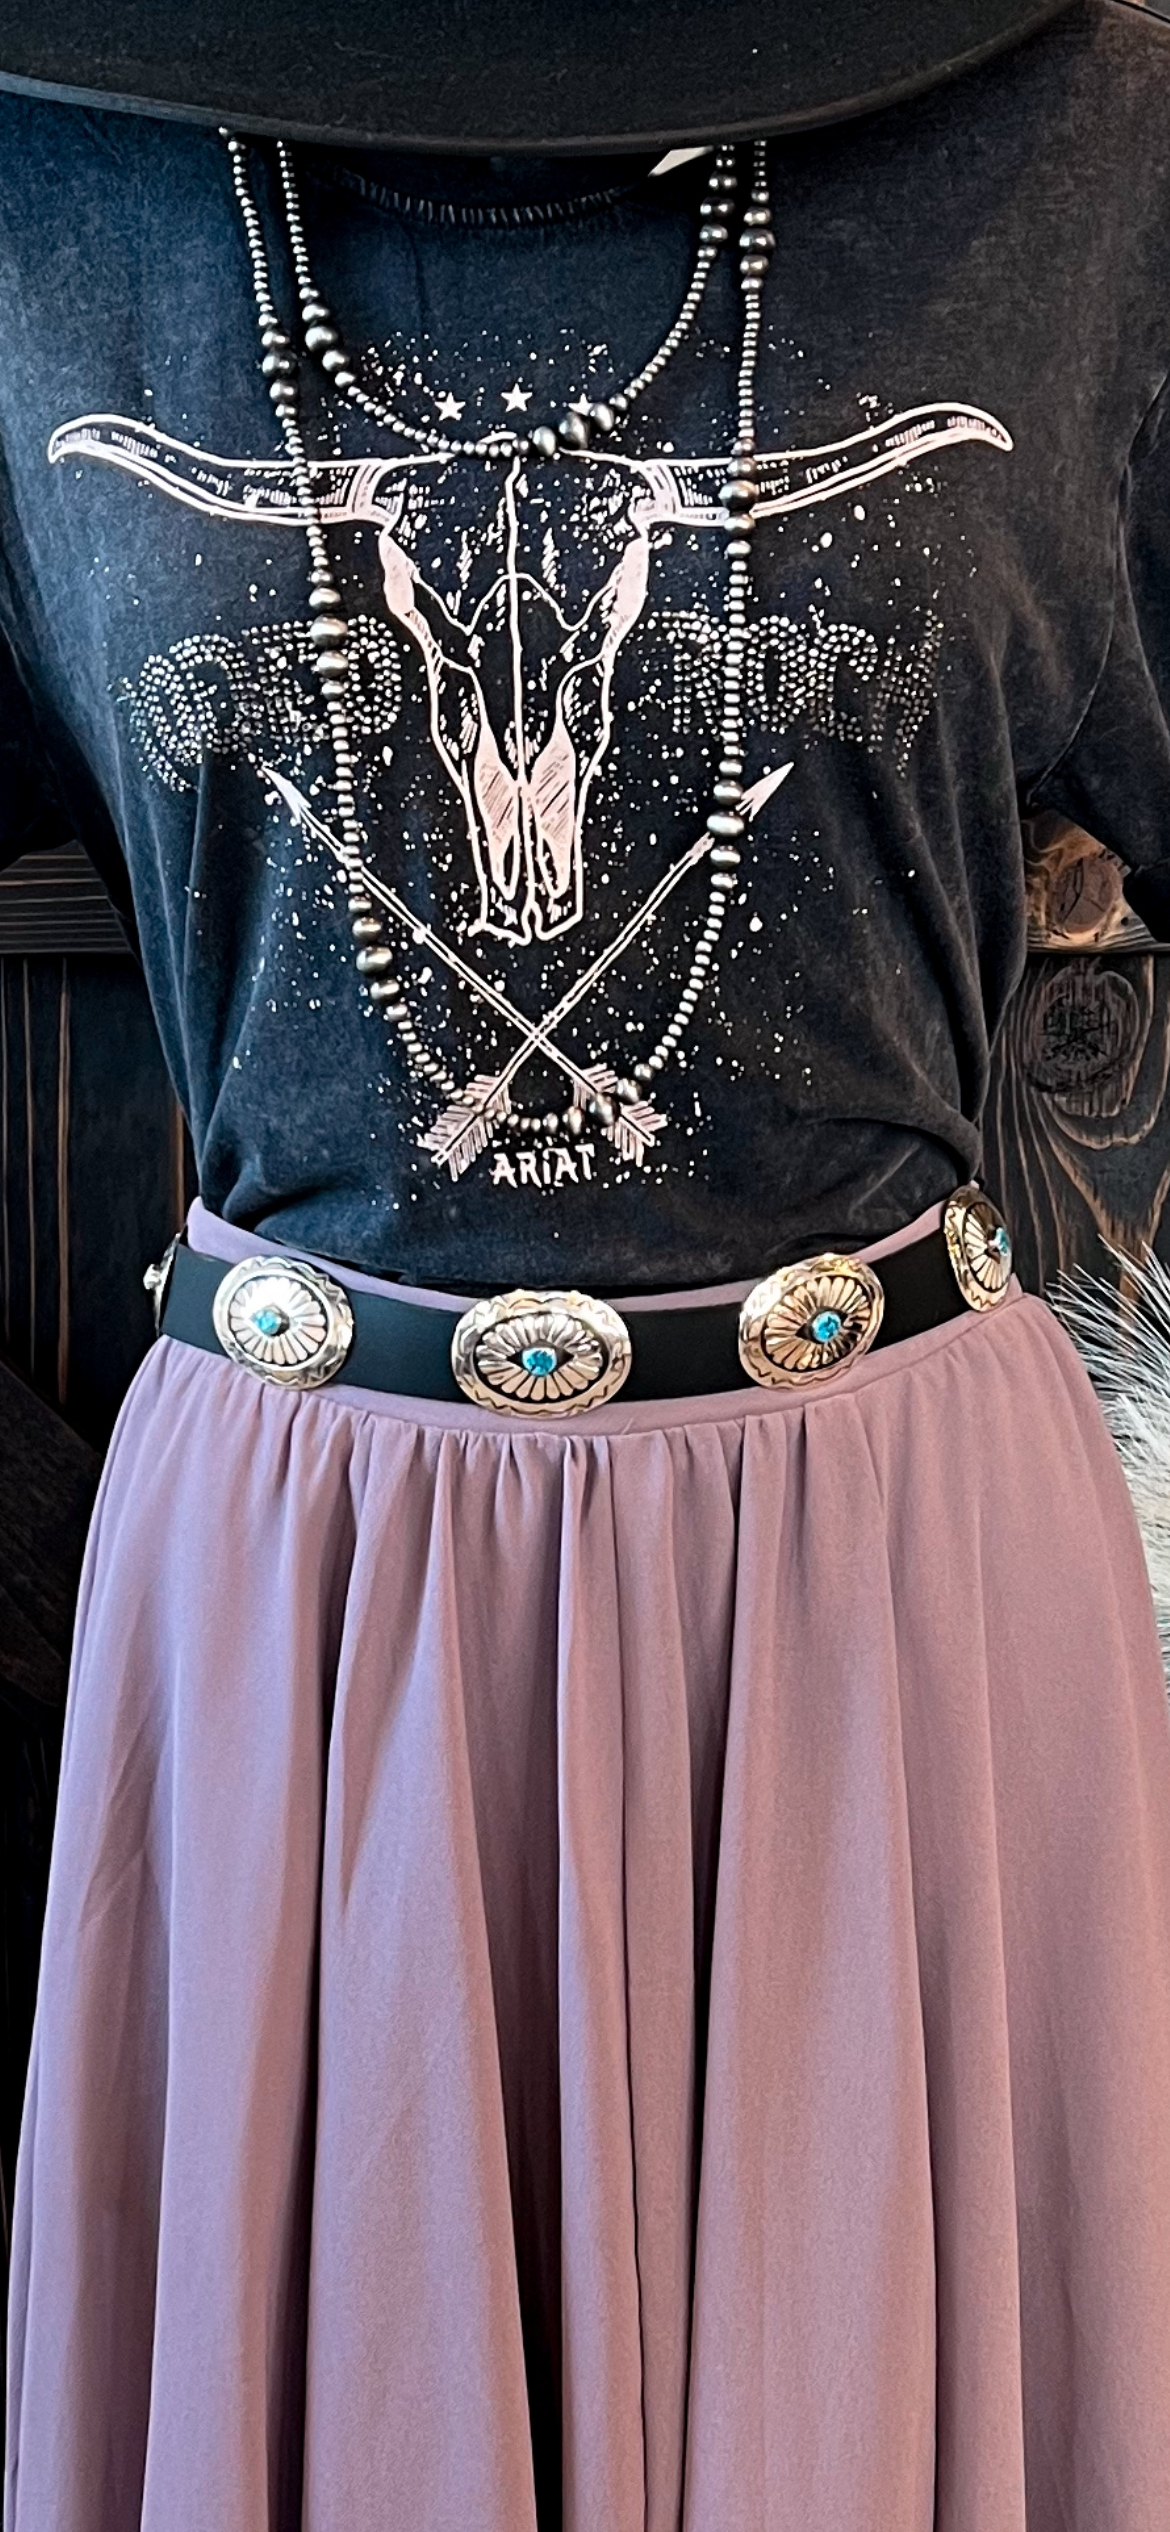 The JoAnn Silver & Turquoise Belt - Round